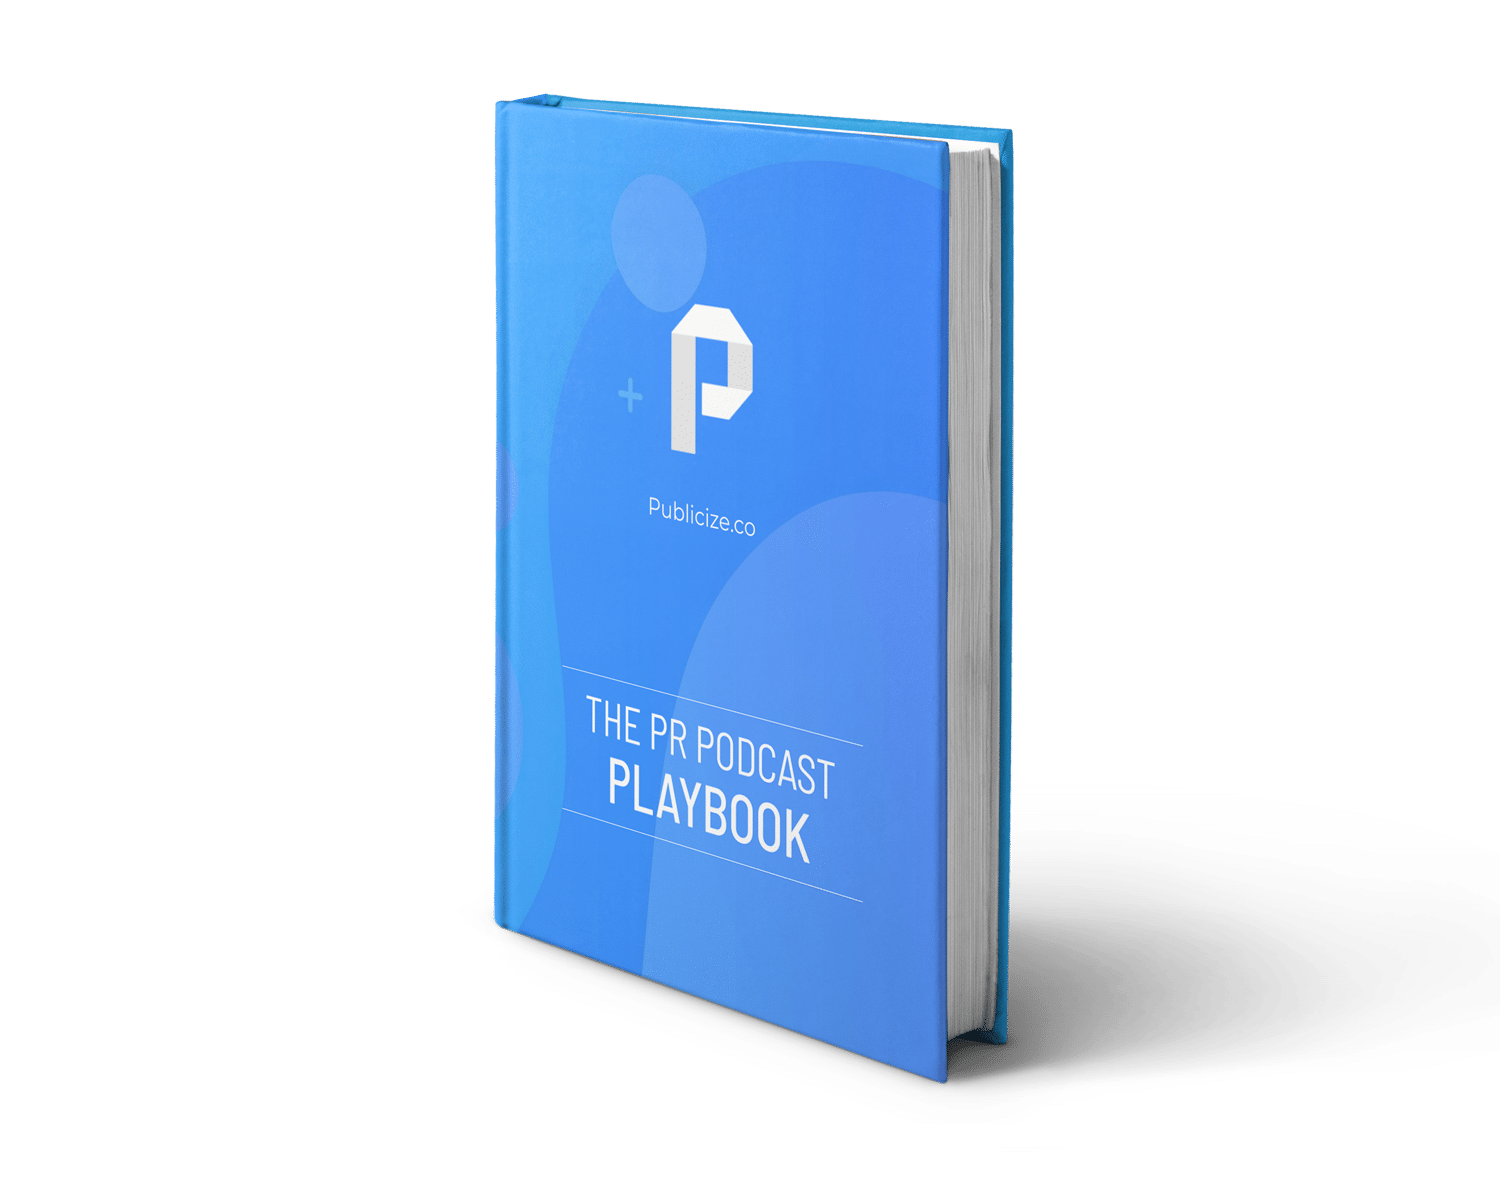 The PR Podcast playbook book